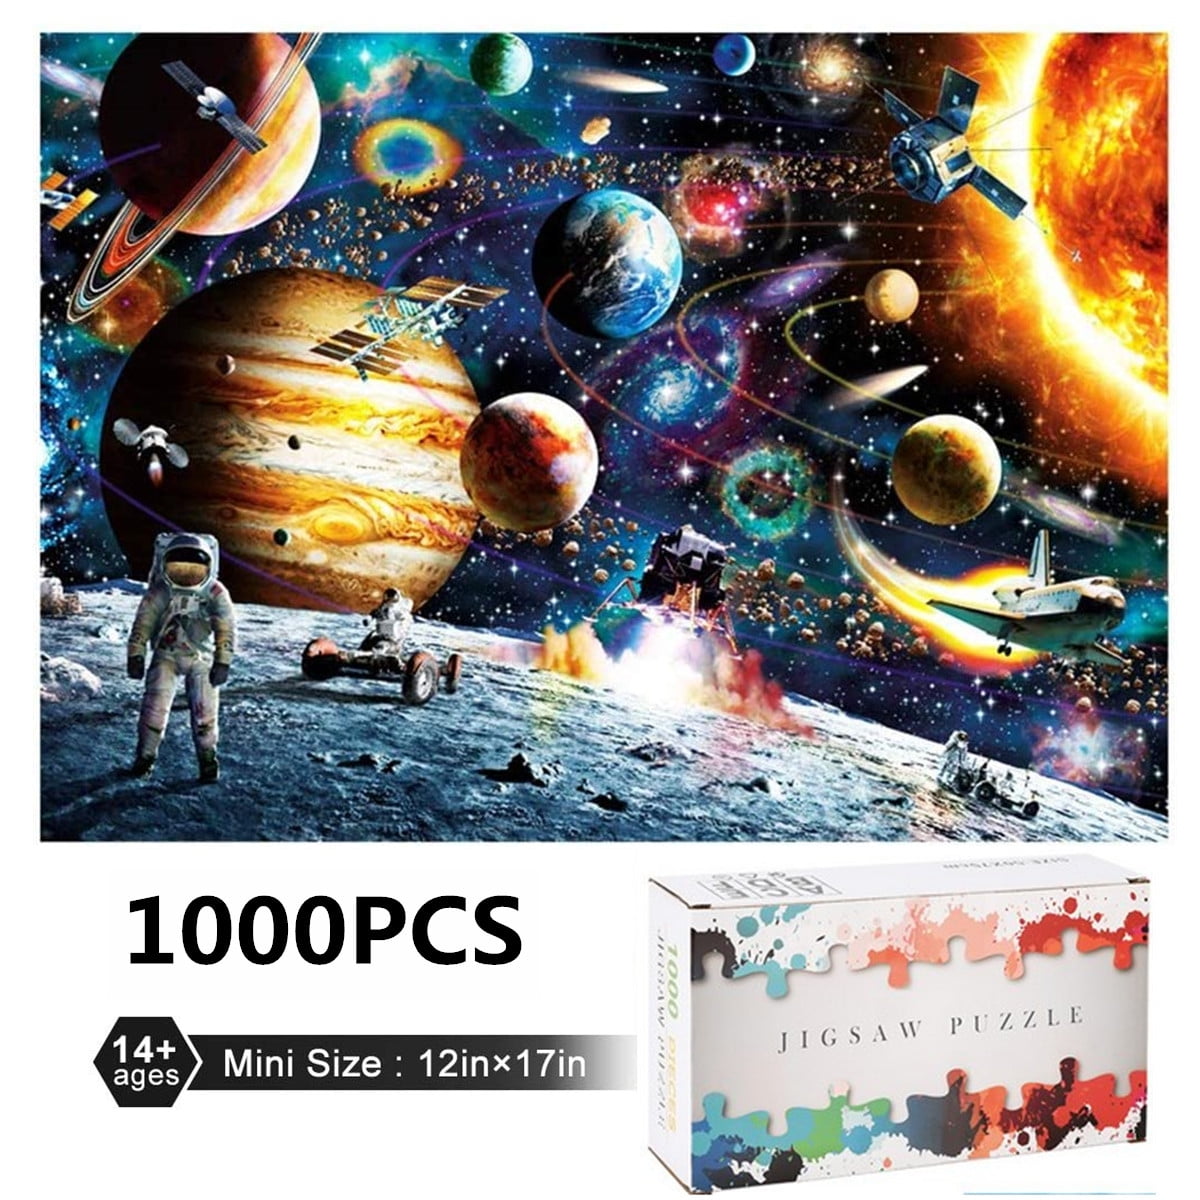 Family Leisure Toy Home Decorations Educational Toys 1000 Pieces Puzzles for Adults and Kids Space Astronaut Planet Jigsaw Starry Sky Galaxy Puzzle Assembling Toy Gifts for Stimulating Imaginations 